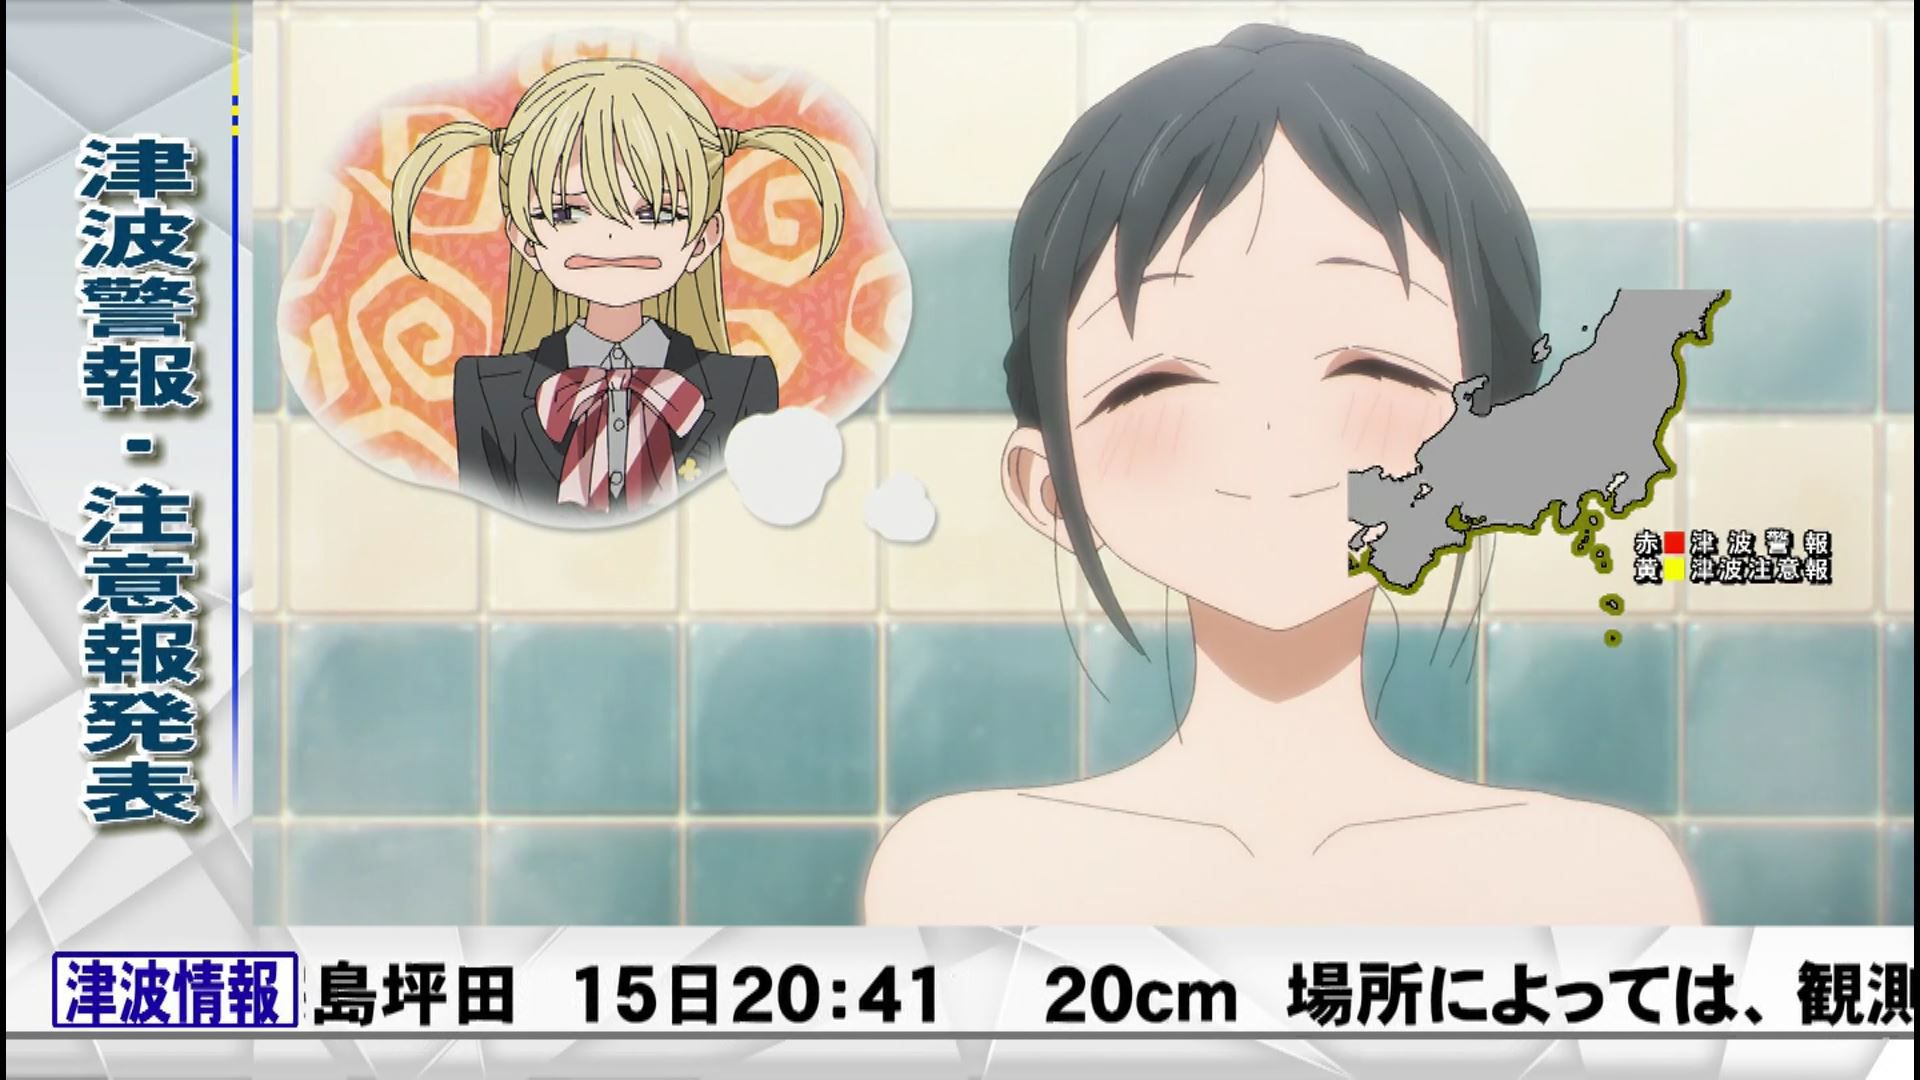 In the anime "Tomorrow-chan's Sailor Suit" episode 2, the girl's erotic bathing scene and the punchy scene 18